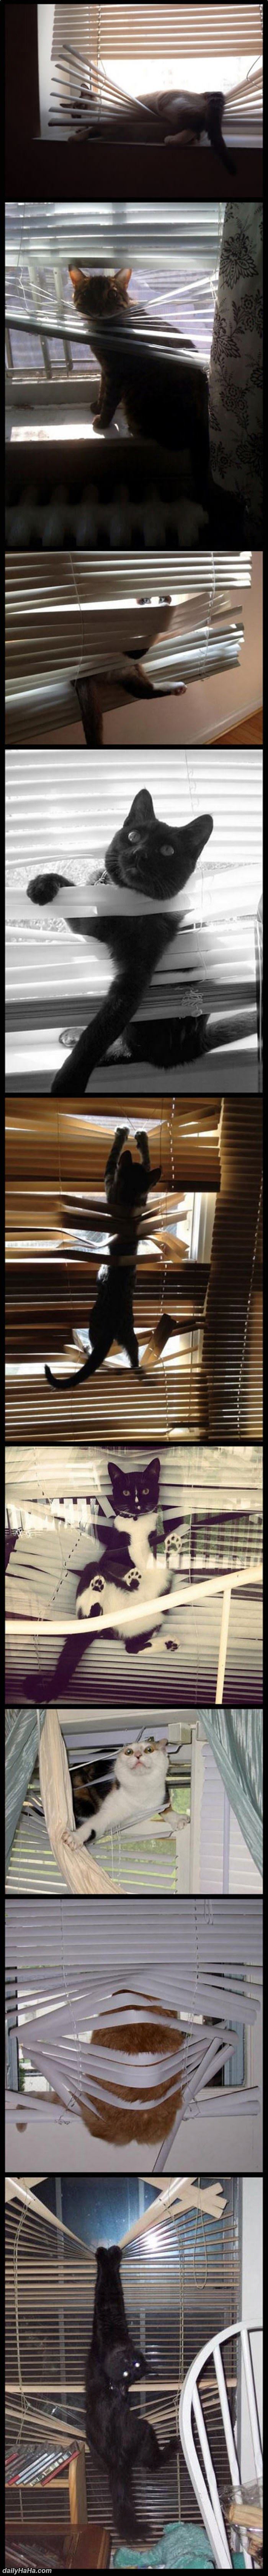 cats loving the blinds funny picture